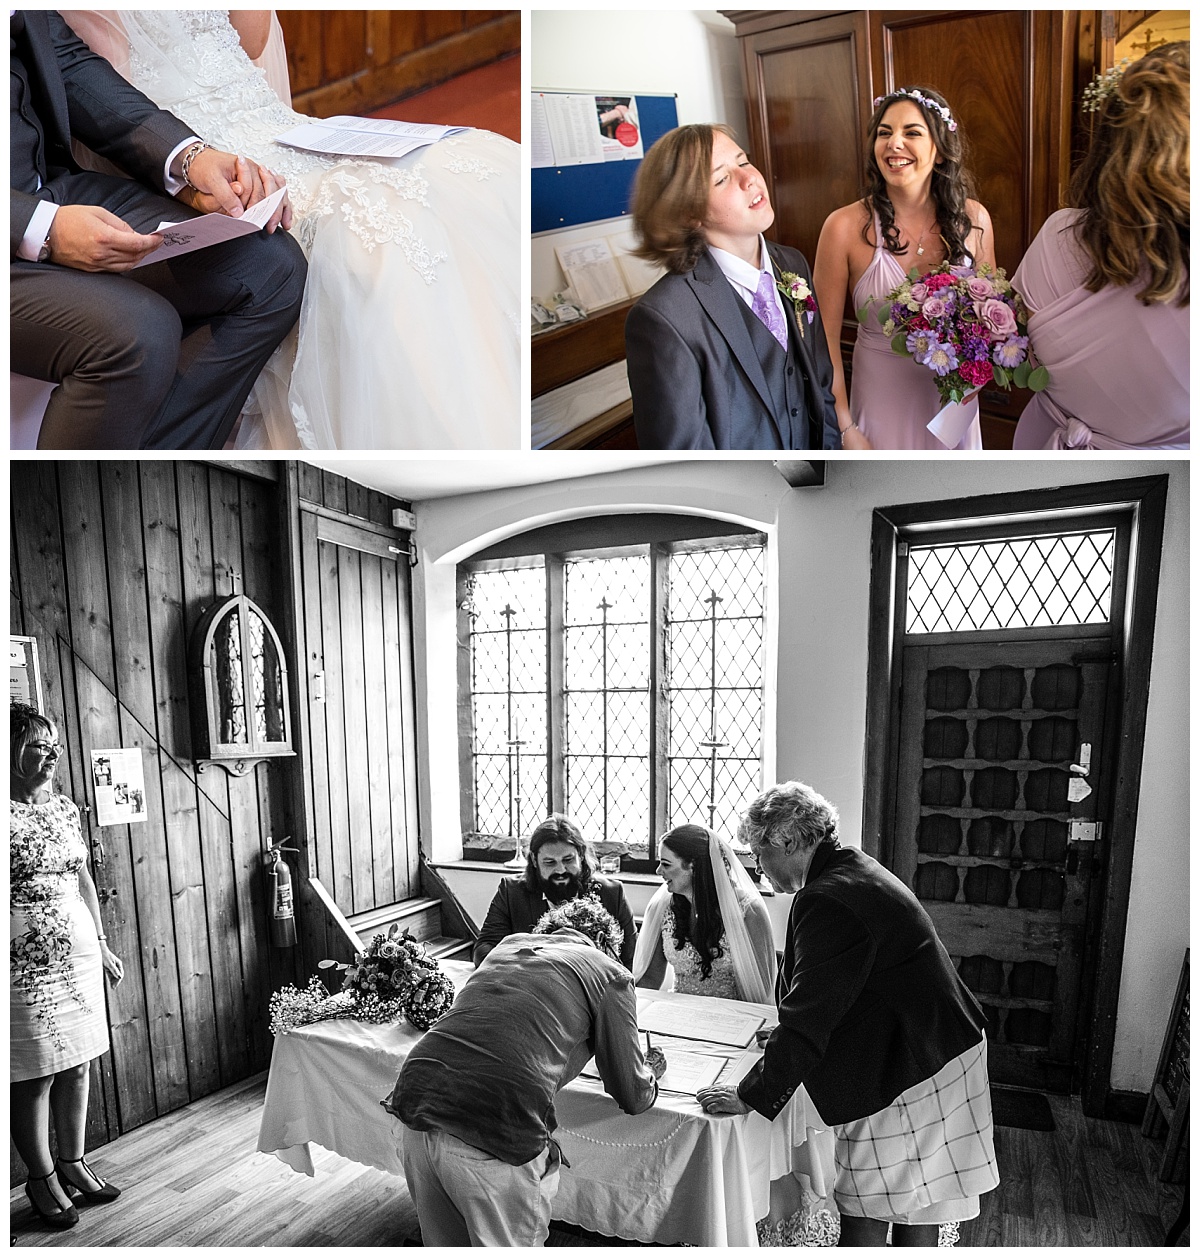 Wedding Photography Manchester - Lauren and Colyn's Wizard Wedding 30